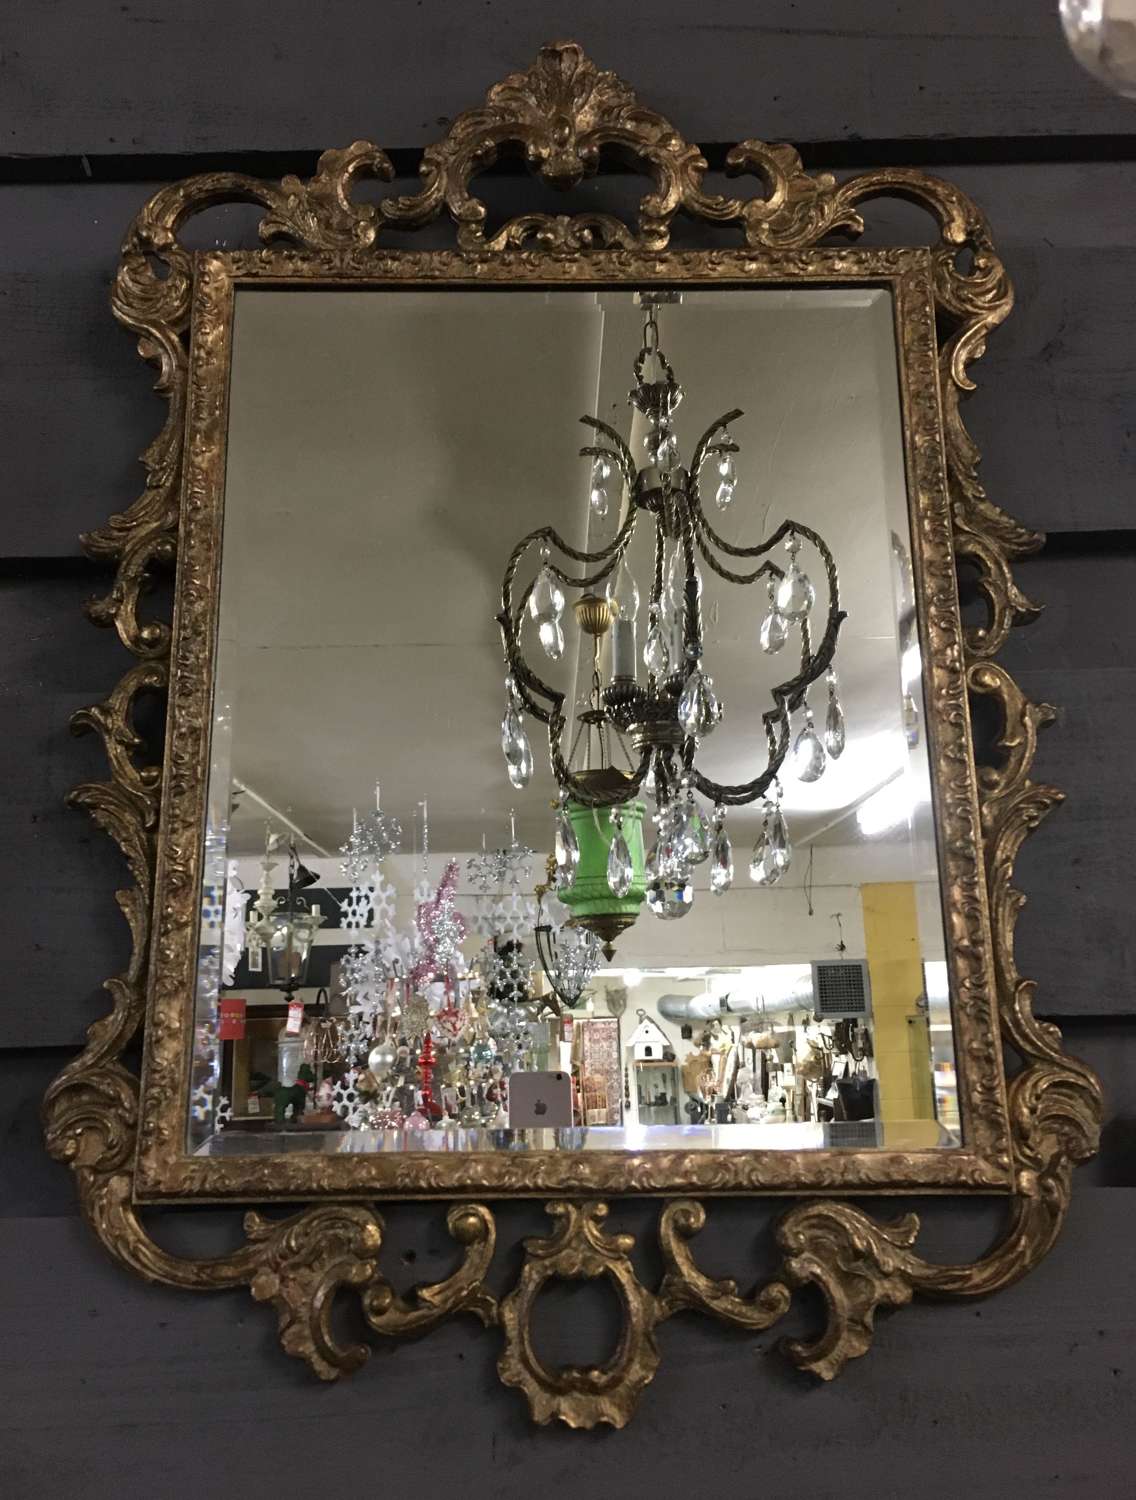 Bevelled glass mirror in an ornate gilded and aged frame